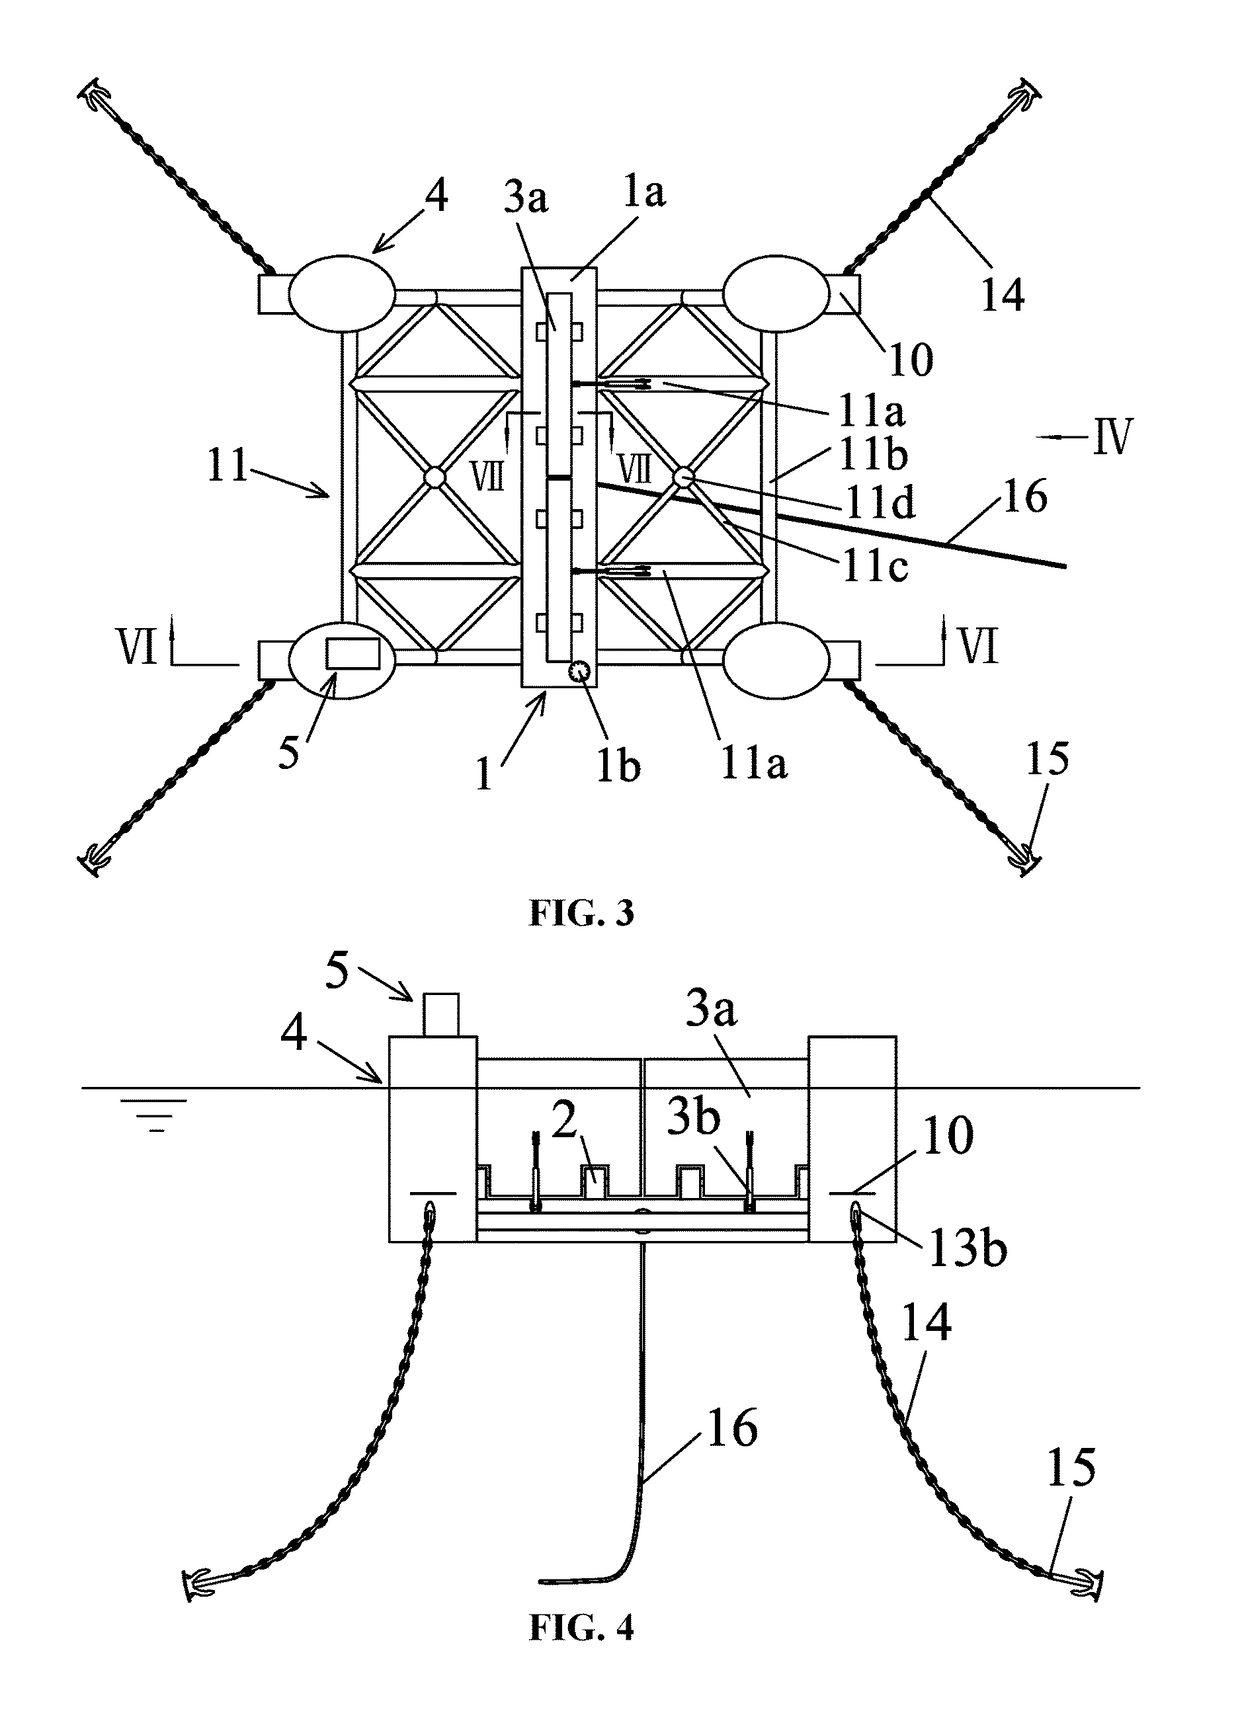 Wave power generation device and method for operating and maintaining the same